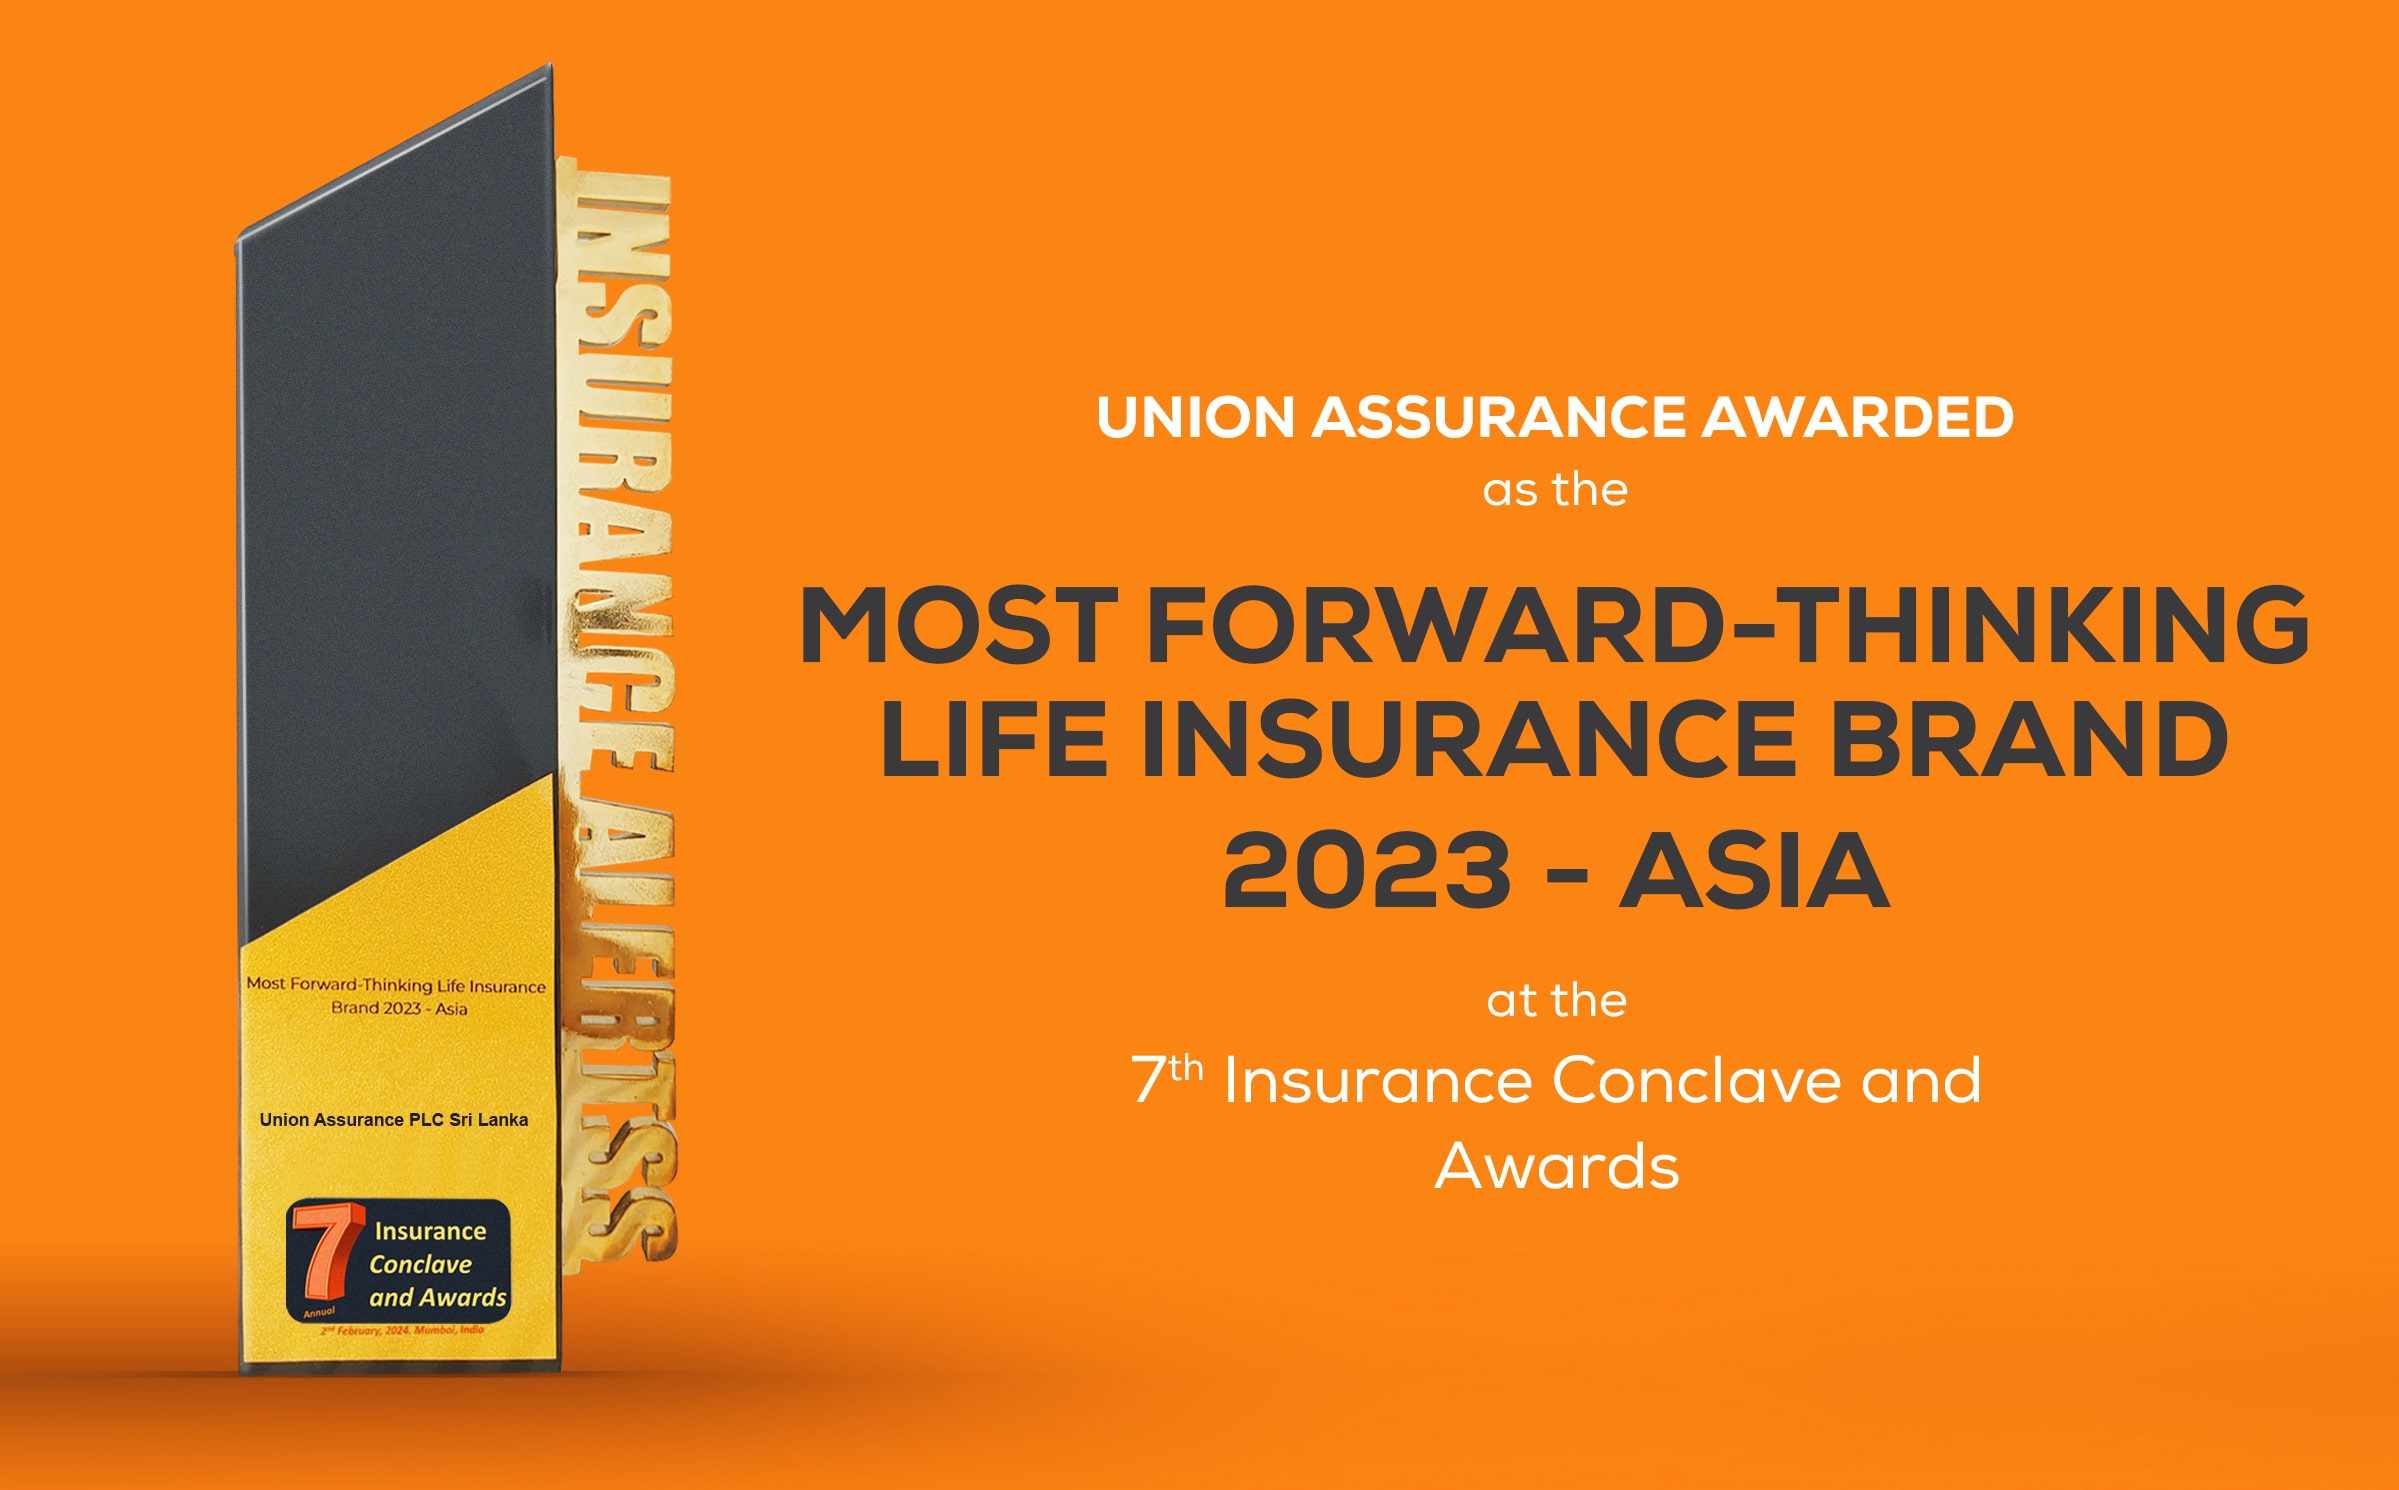 Union Assurance is Recognized as Asia’s Most Forward-Thinking Life Insurance Brand